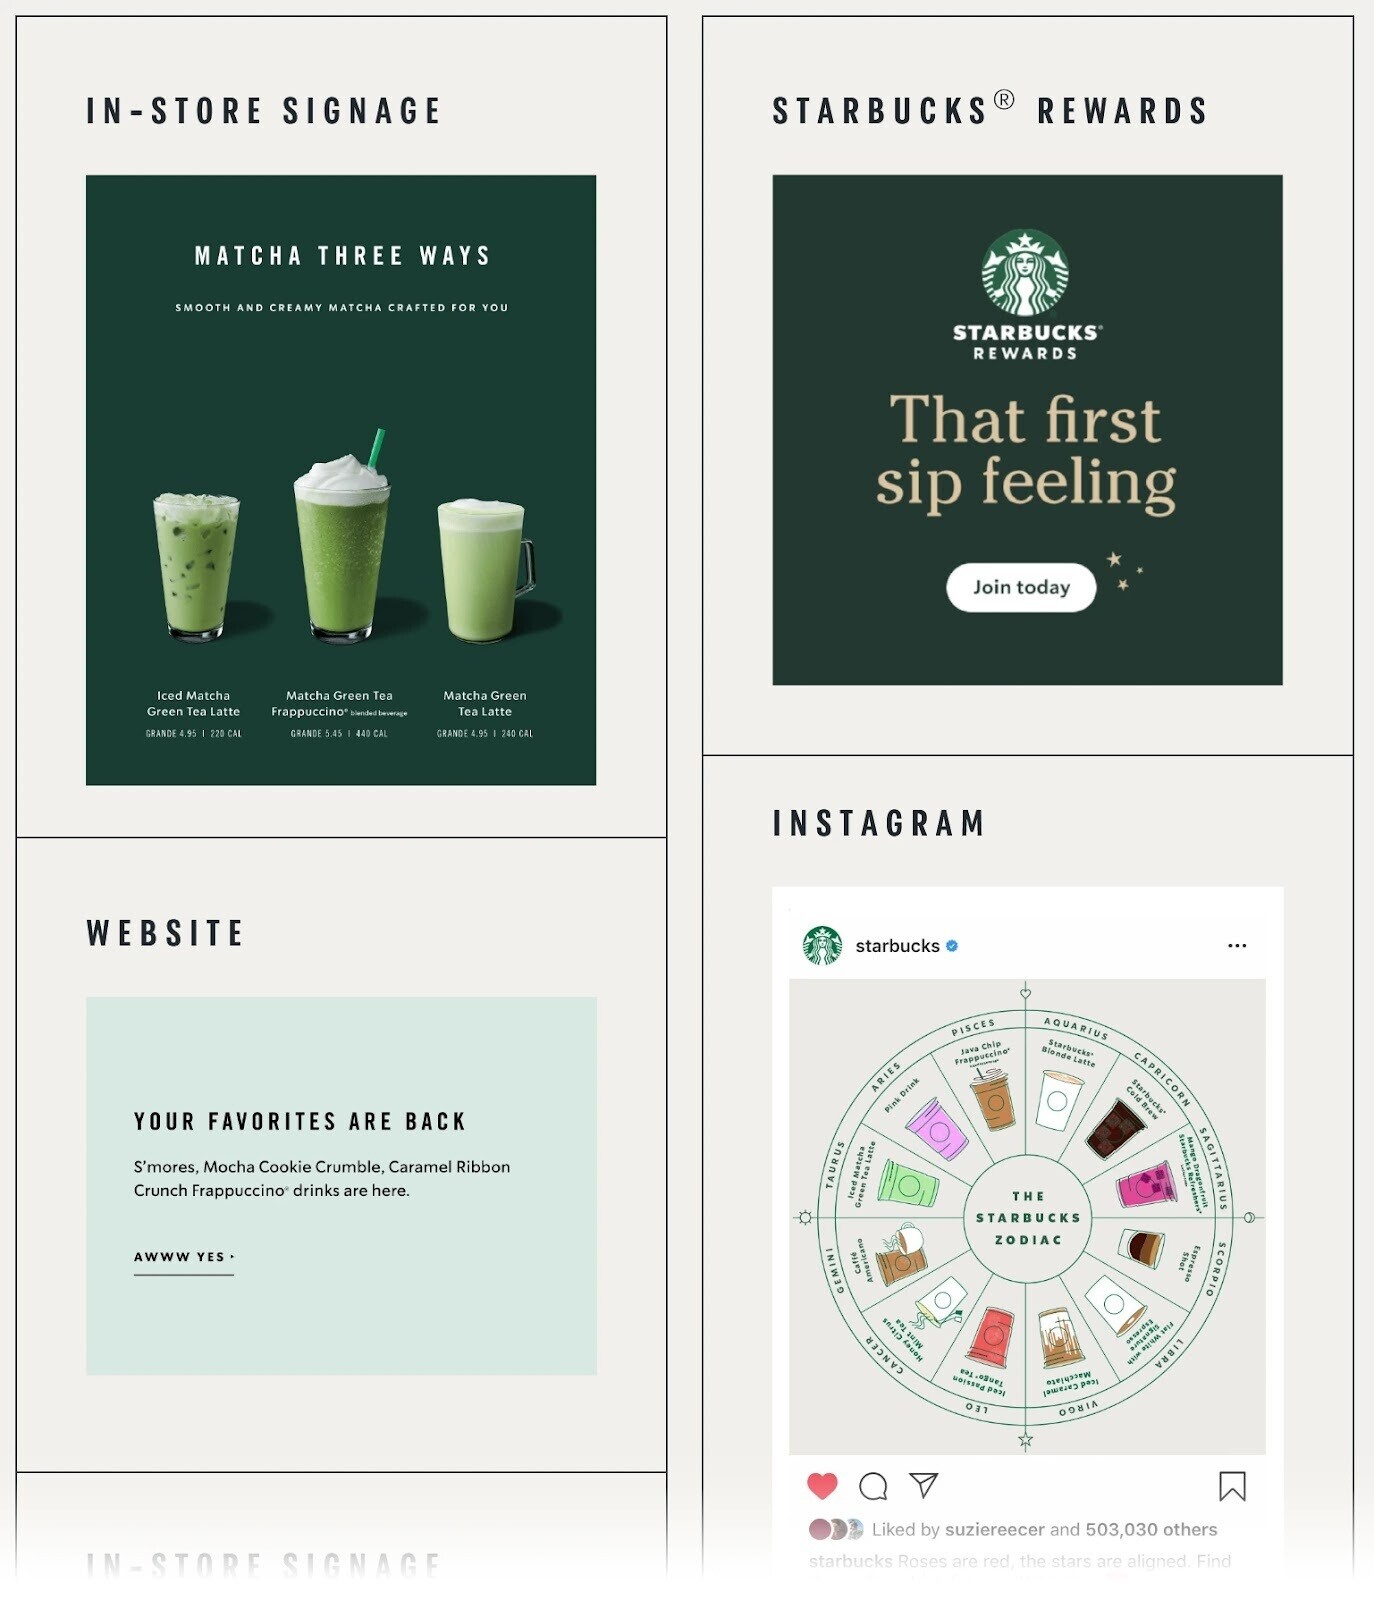 an example of Starbucks messages in different channels, in-store signage, Starbucks Rewards, website and Instagram